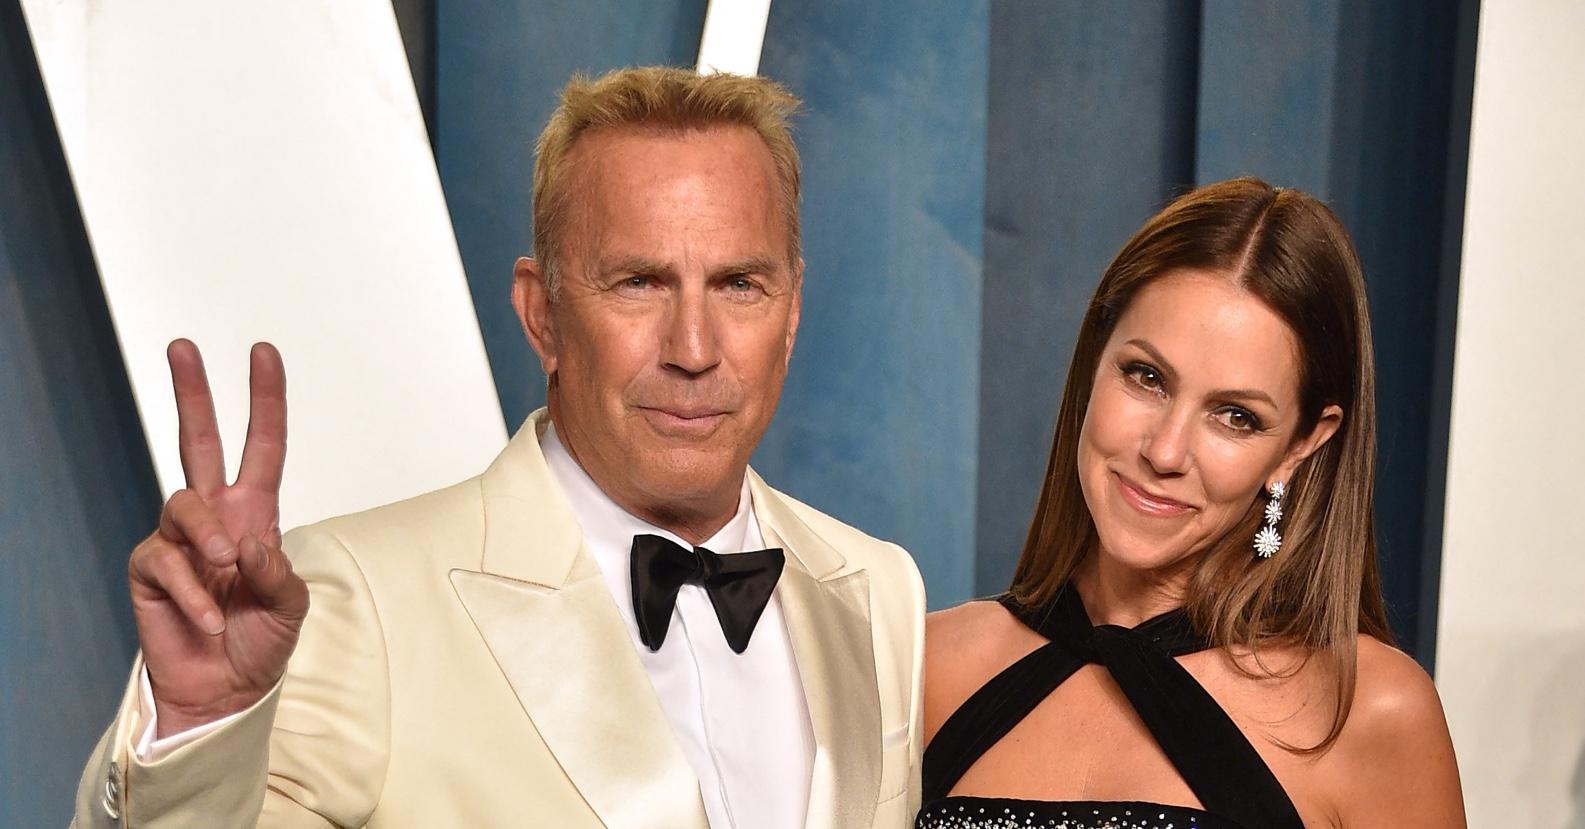 Kevin Costner Wears Wedding Ring 1 Day Before Wife Filed For Divorce